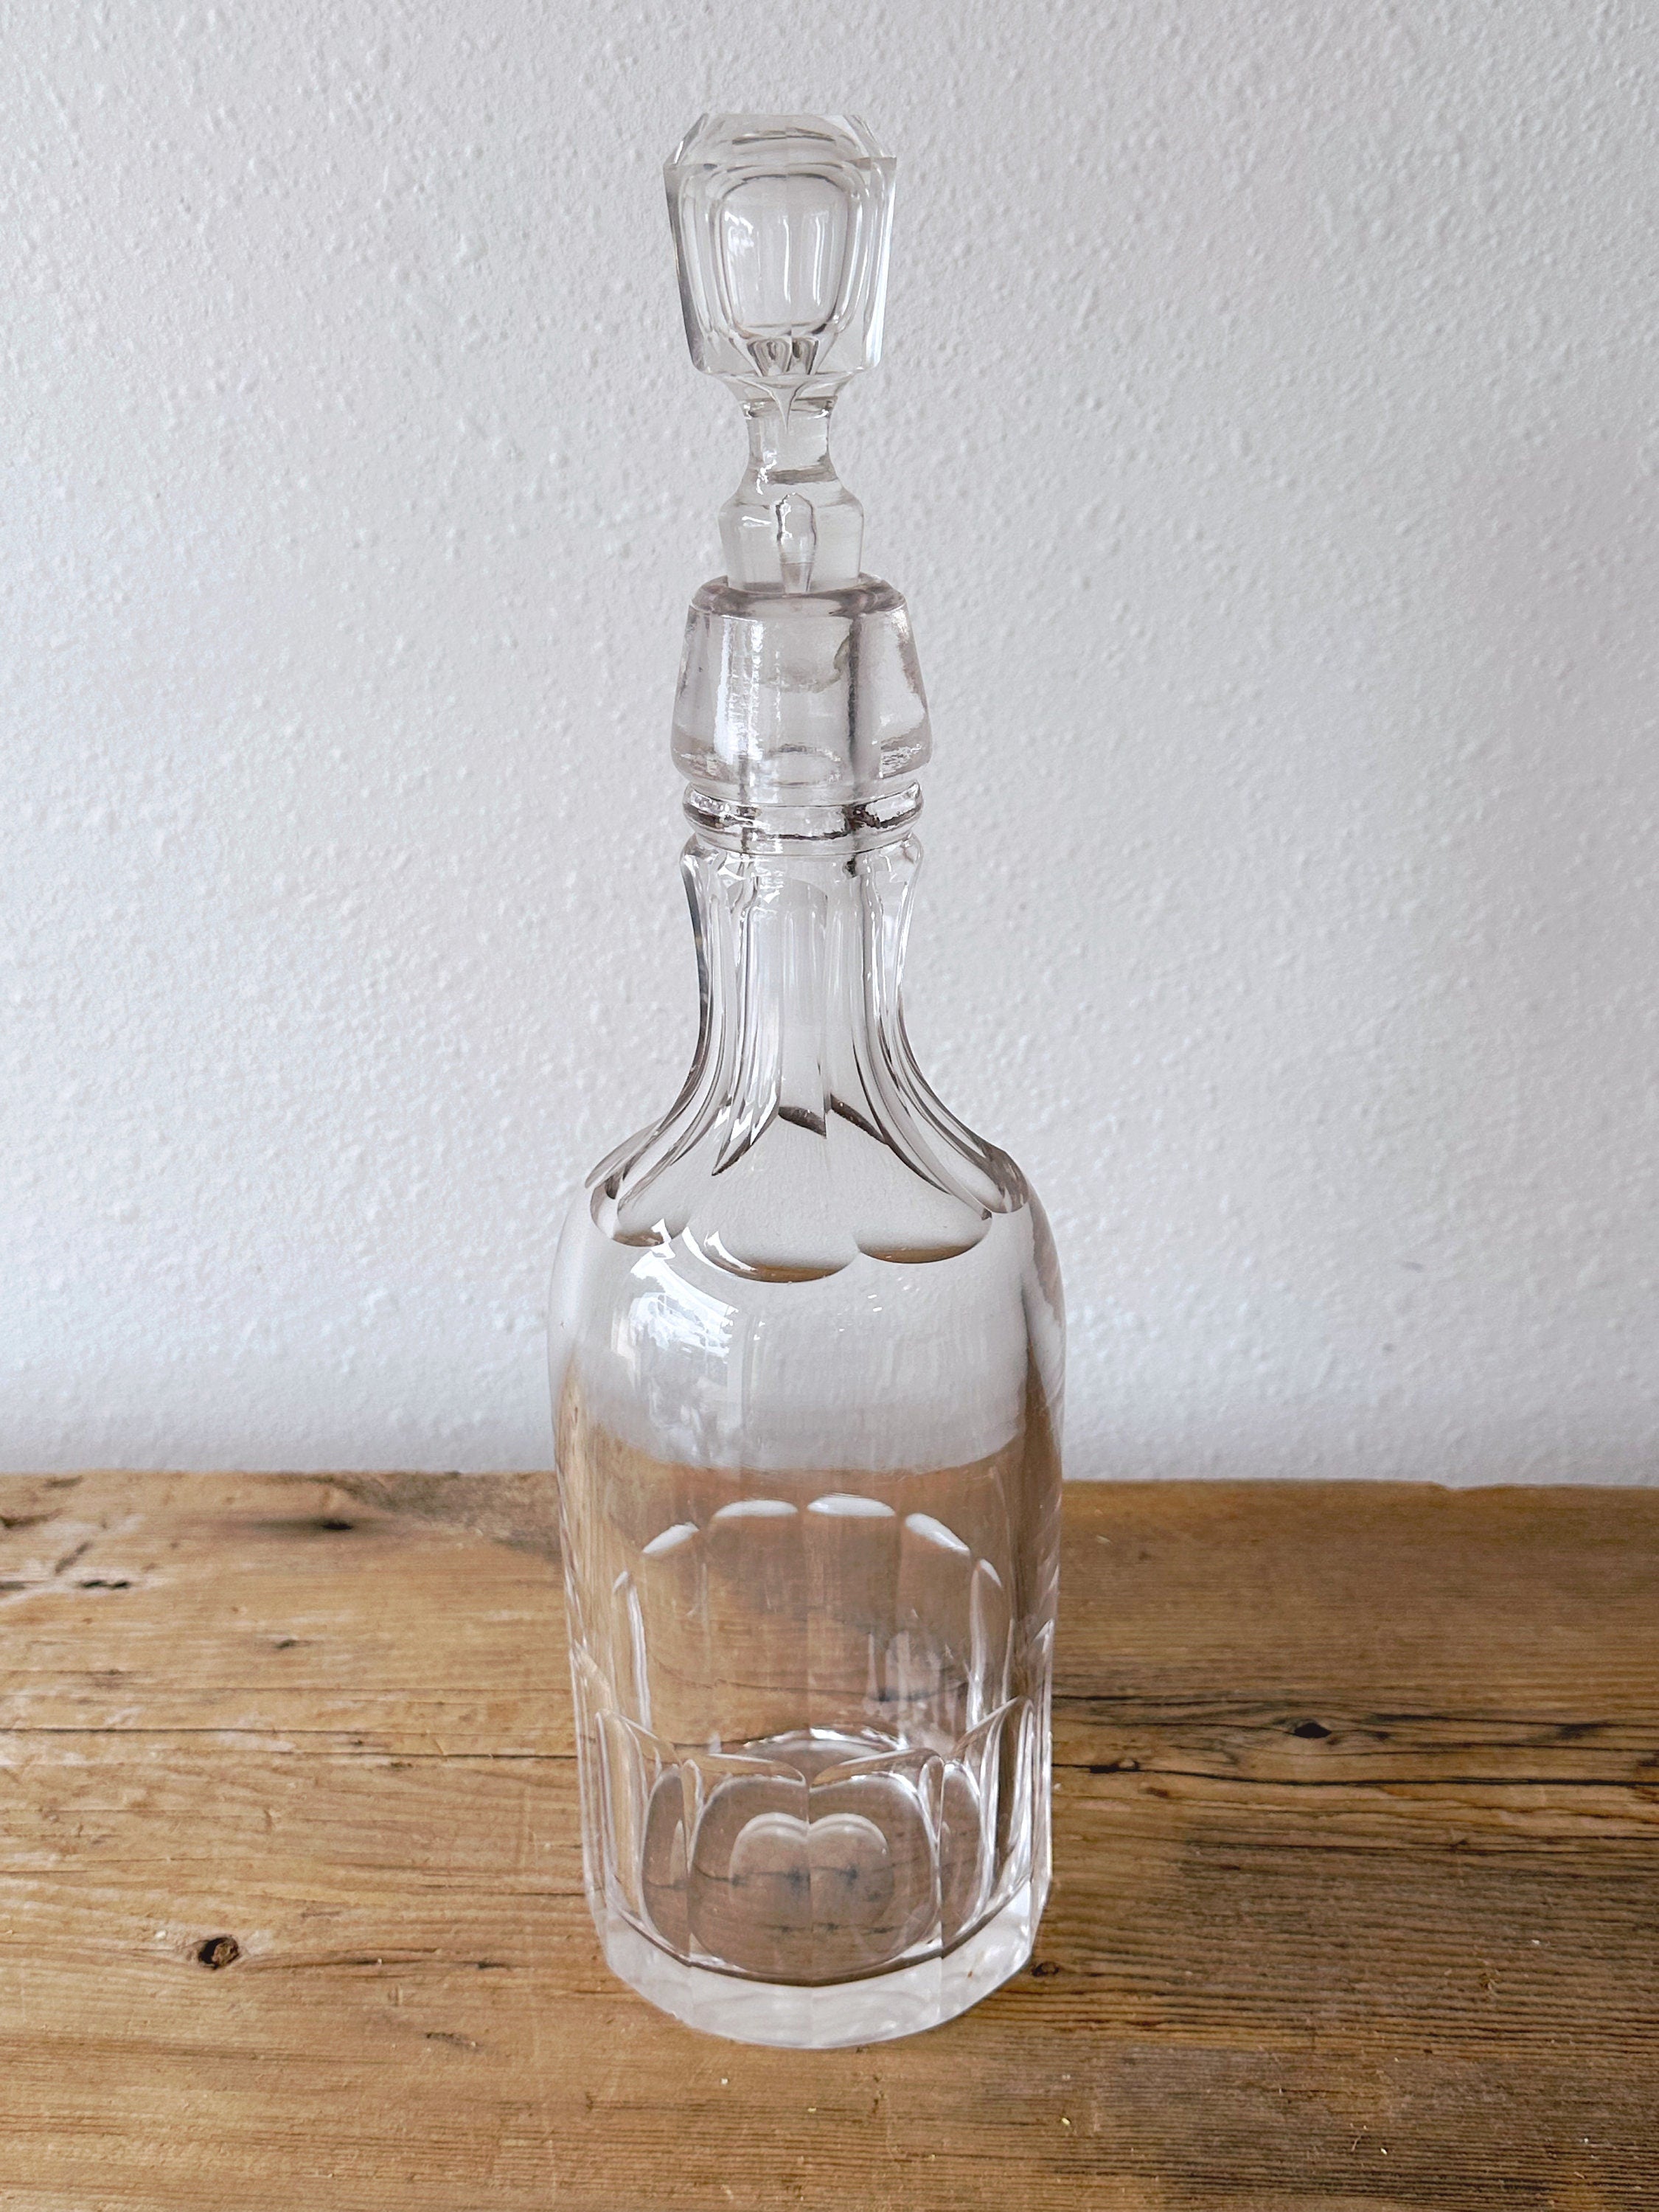 Vintage Brilliant Clear Crystal Glass Decanter | Antique Liquor Decanter Barware Bar Cart Decor | Gift for Him Father's Day Gift